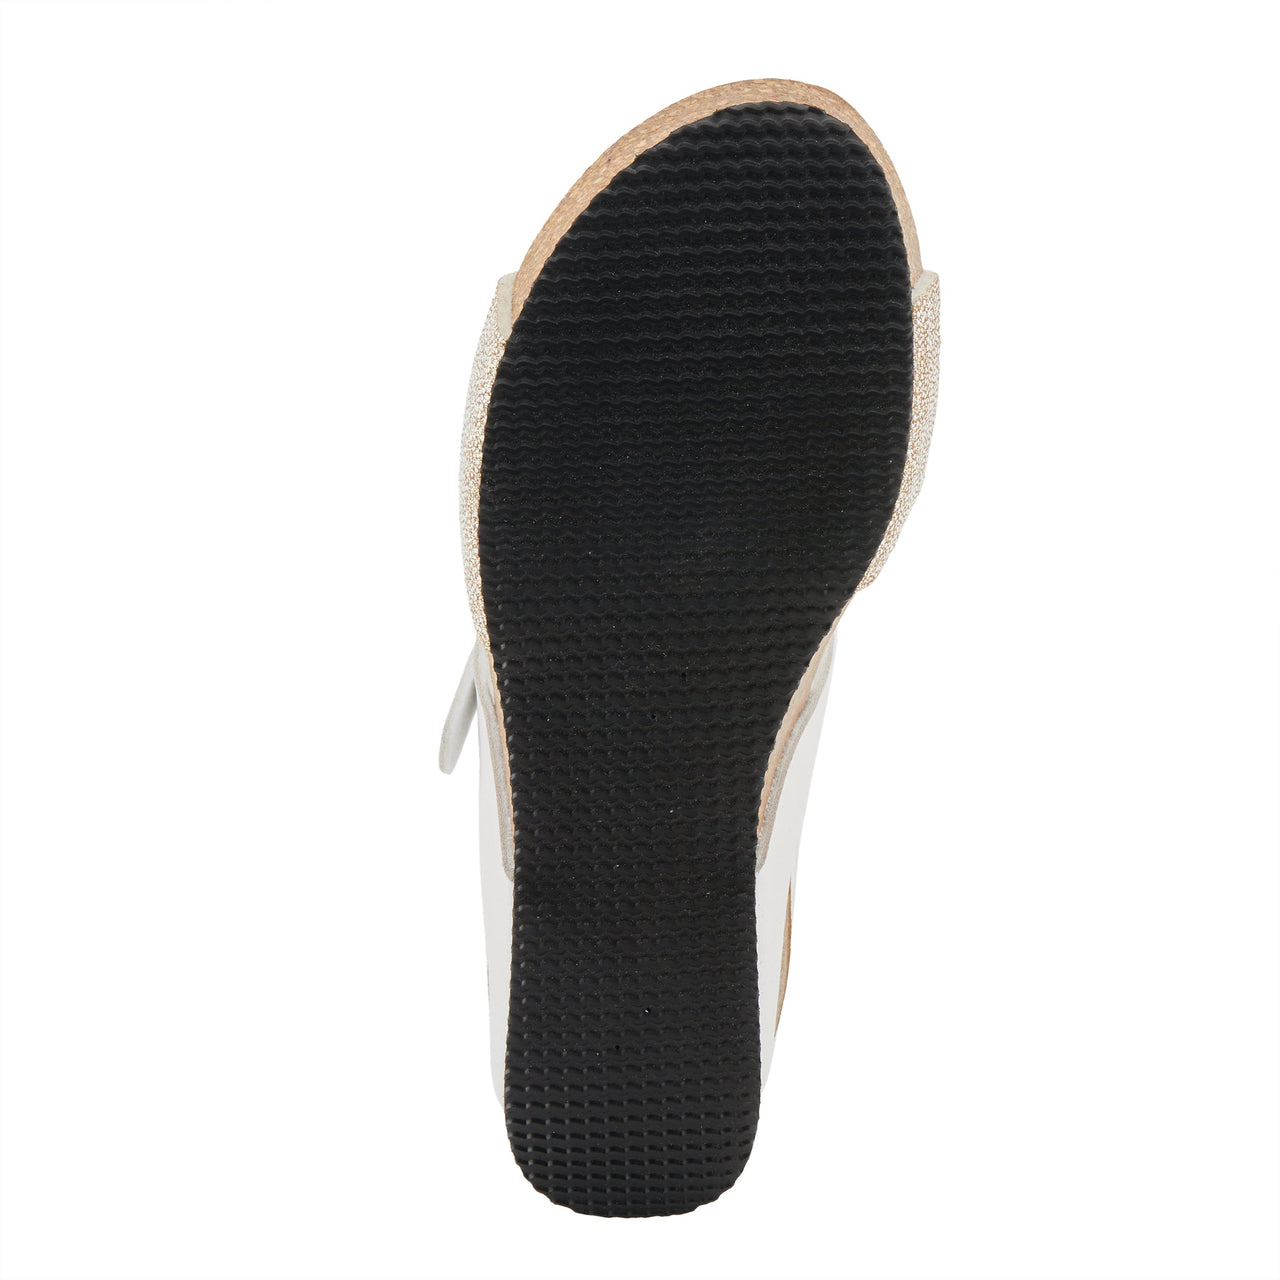 Sophisticated Spring Step Bynum Sandals designed with cushioned footbeds for all-day comfort and support